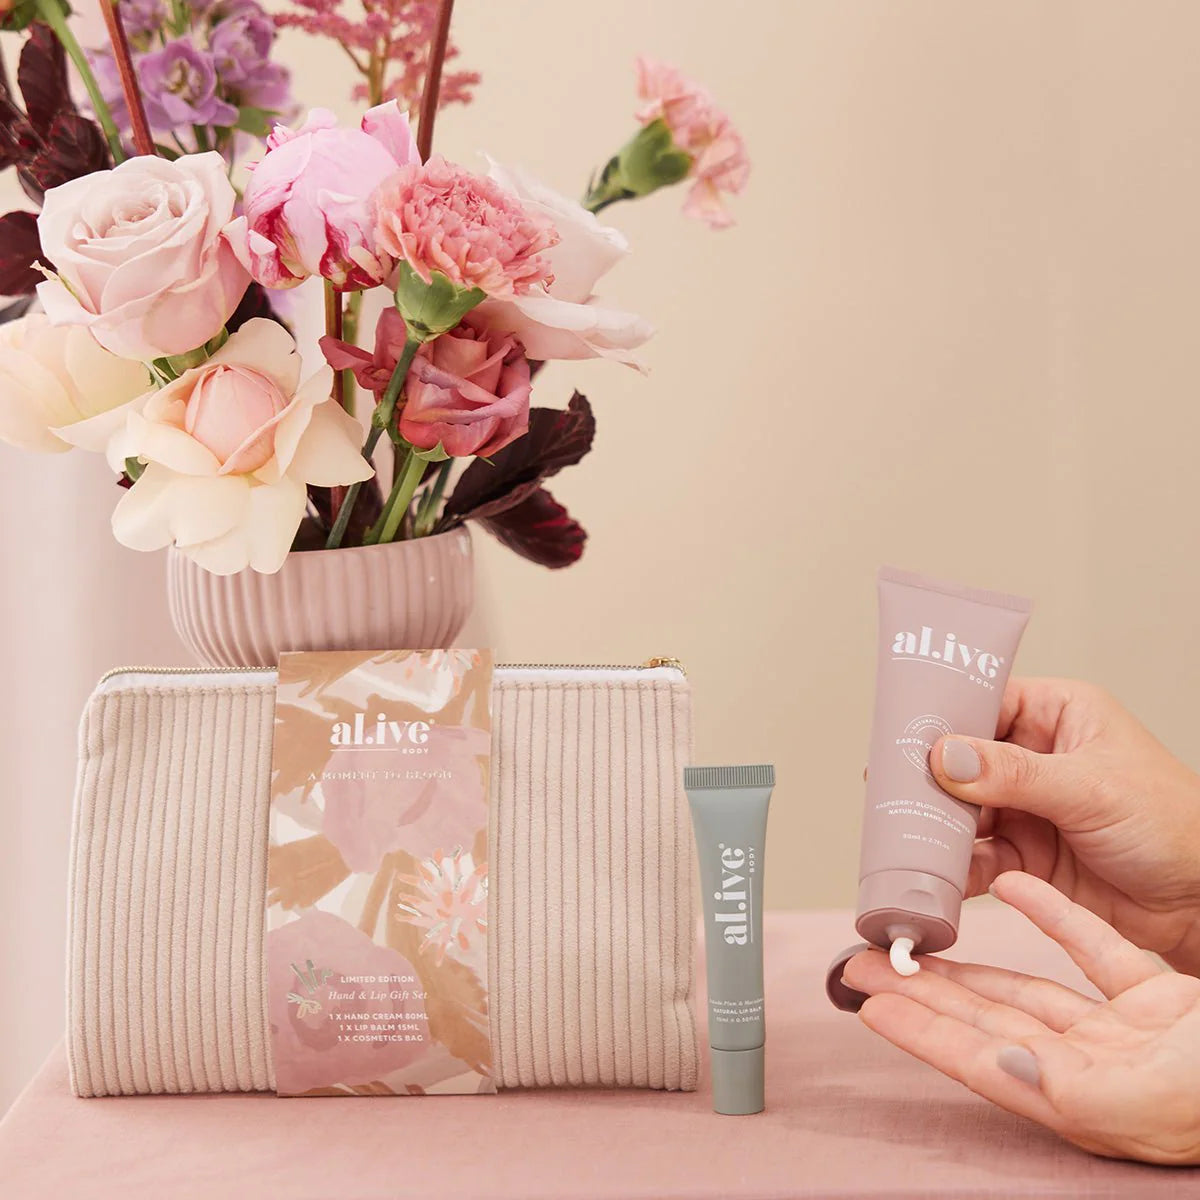 LIMITED EDITION Hand & Lip Gift Set - A Moment To Bloom